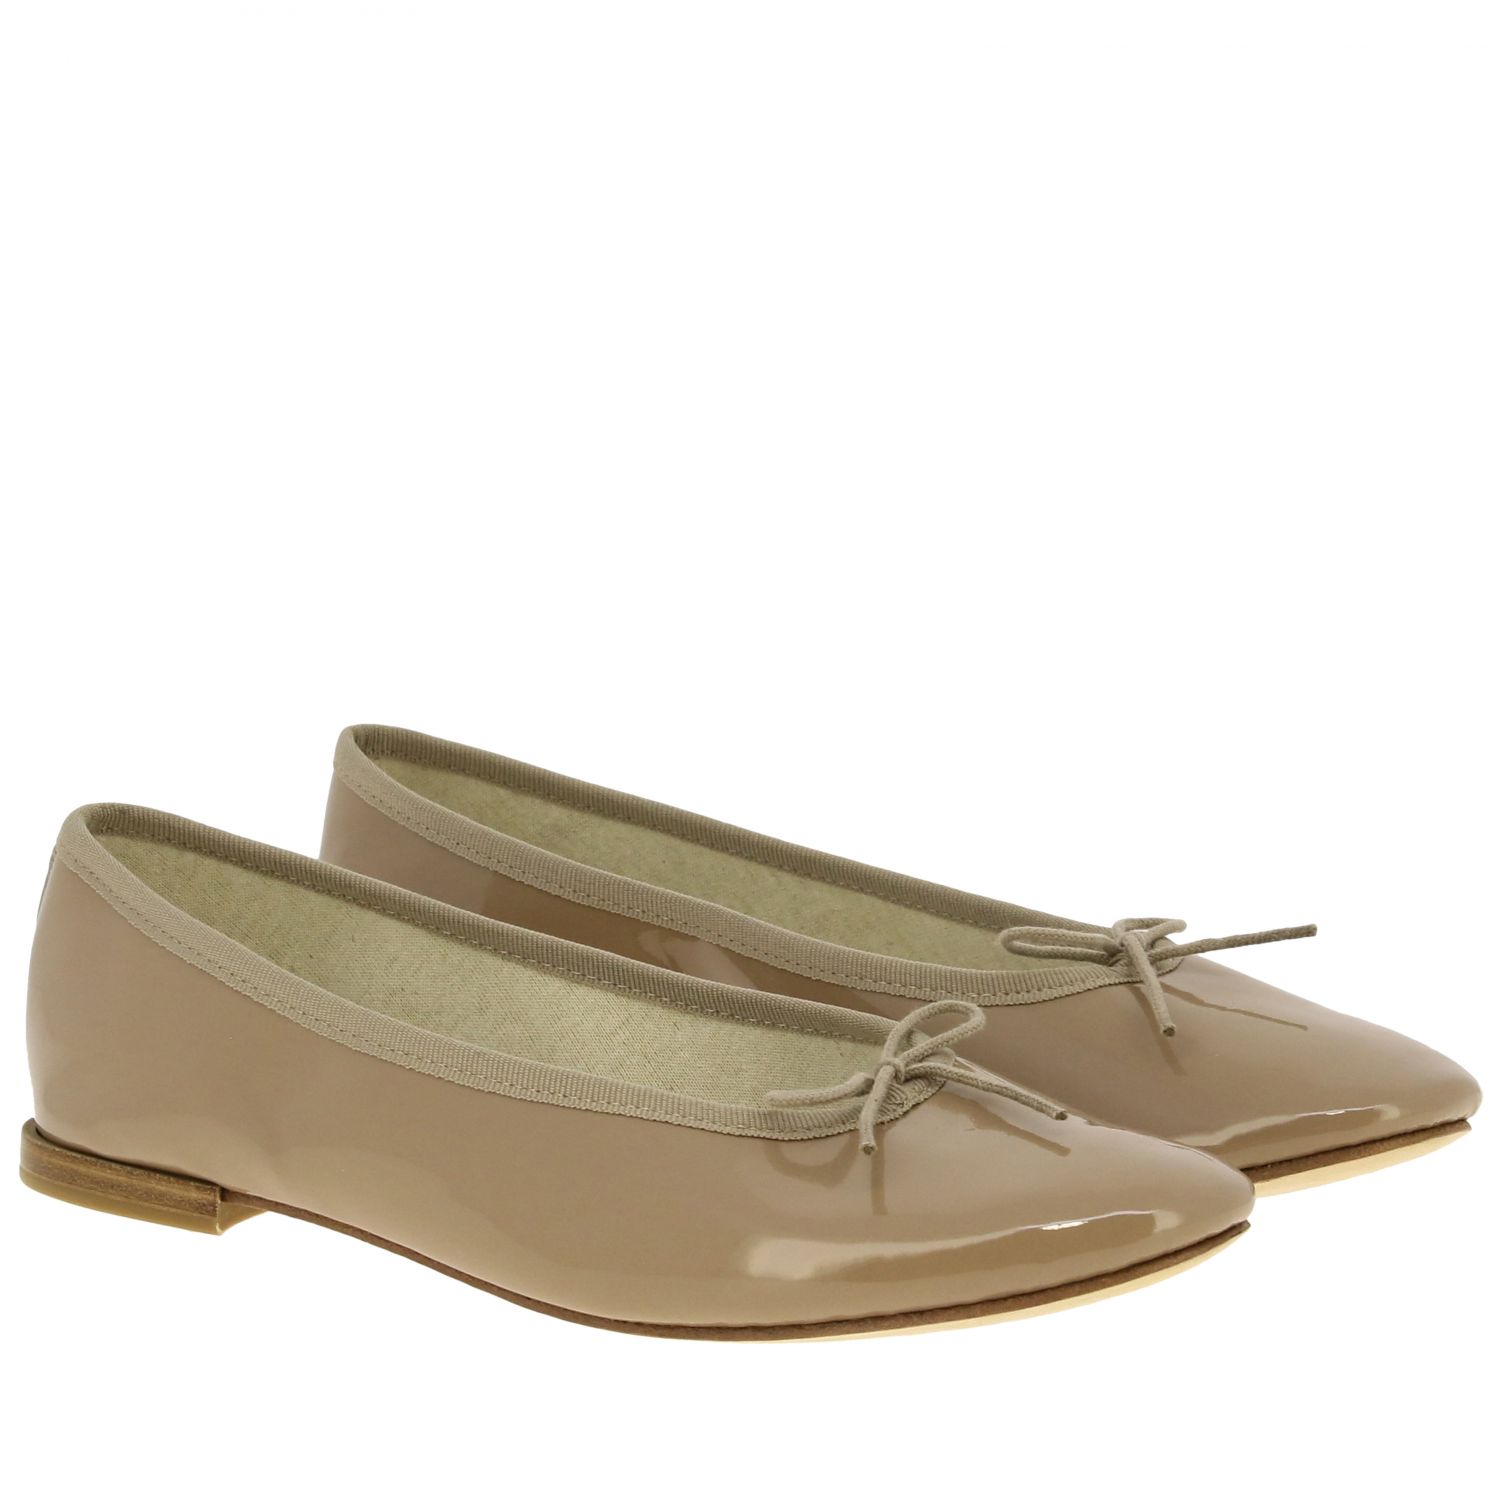 Repetto Outlet: Ballet flats women | Ballet Flats Repetto Women Nude ...